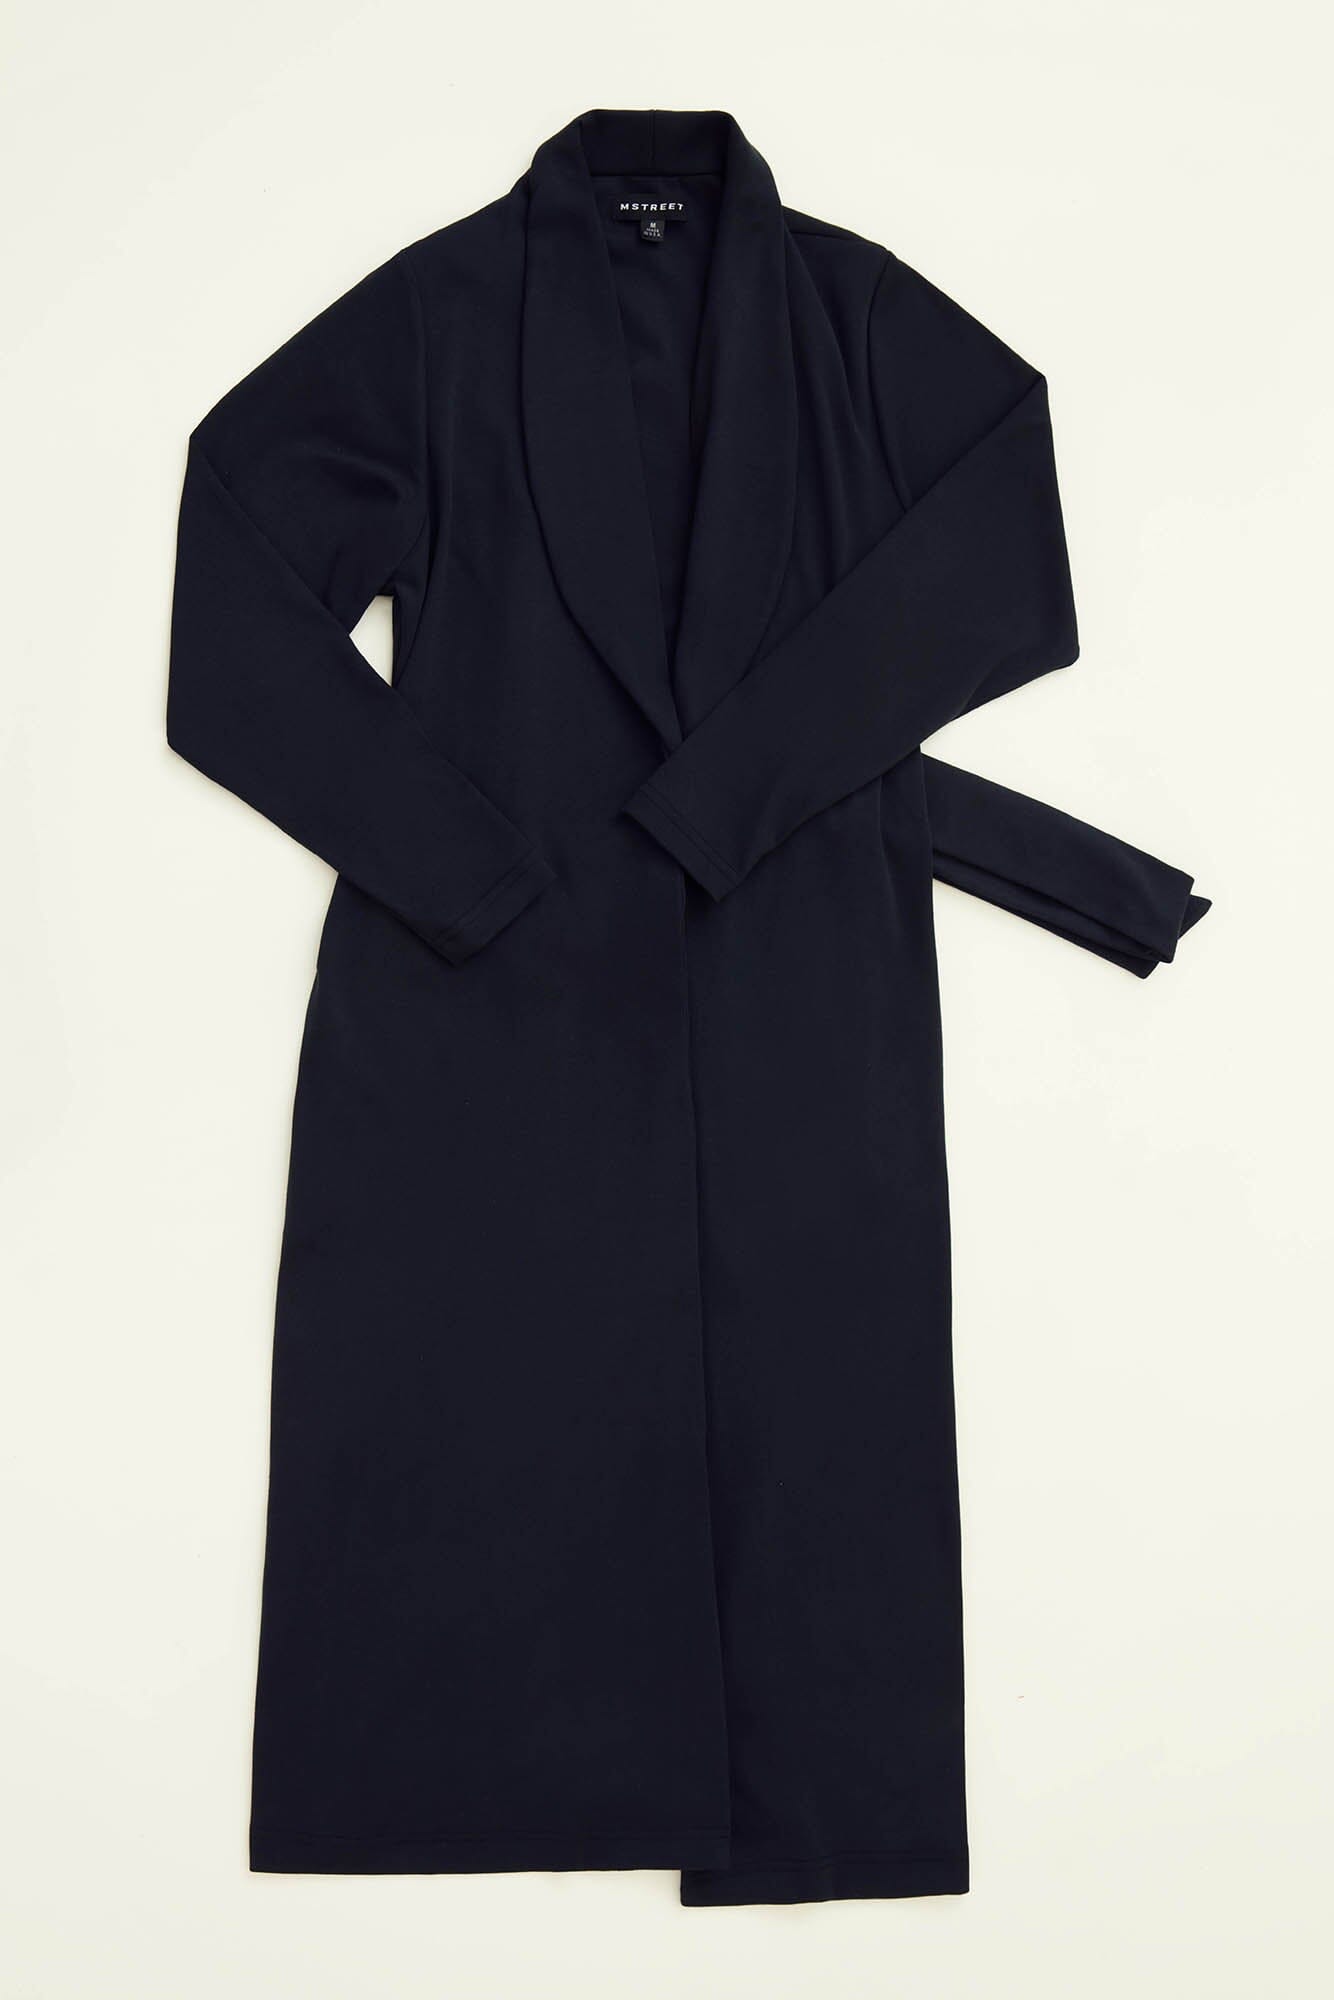 Zahra Over Belly Duster Cardigan in navy black